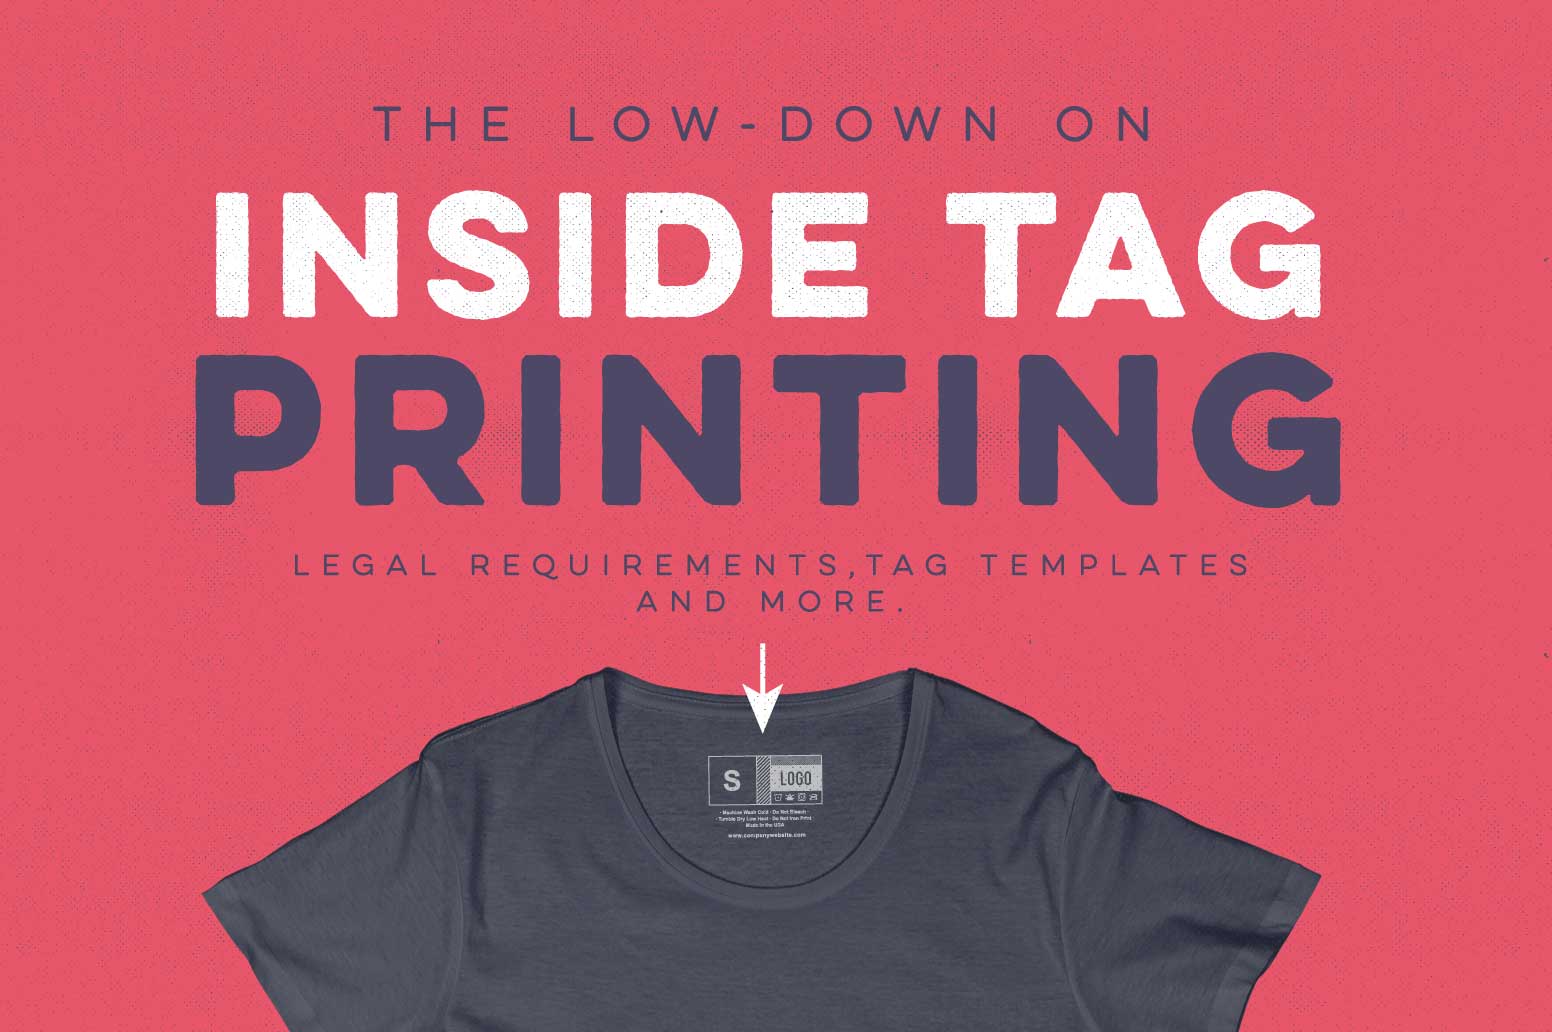 Download Inside Tag Printing Low Down Legal Requirements Tag Templates And More PSD Mockup Templates